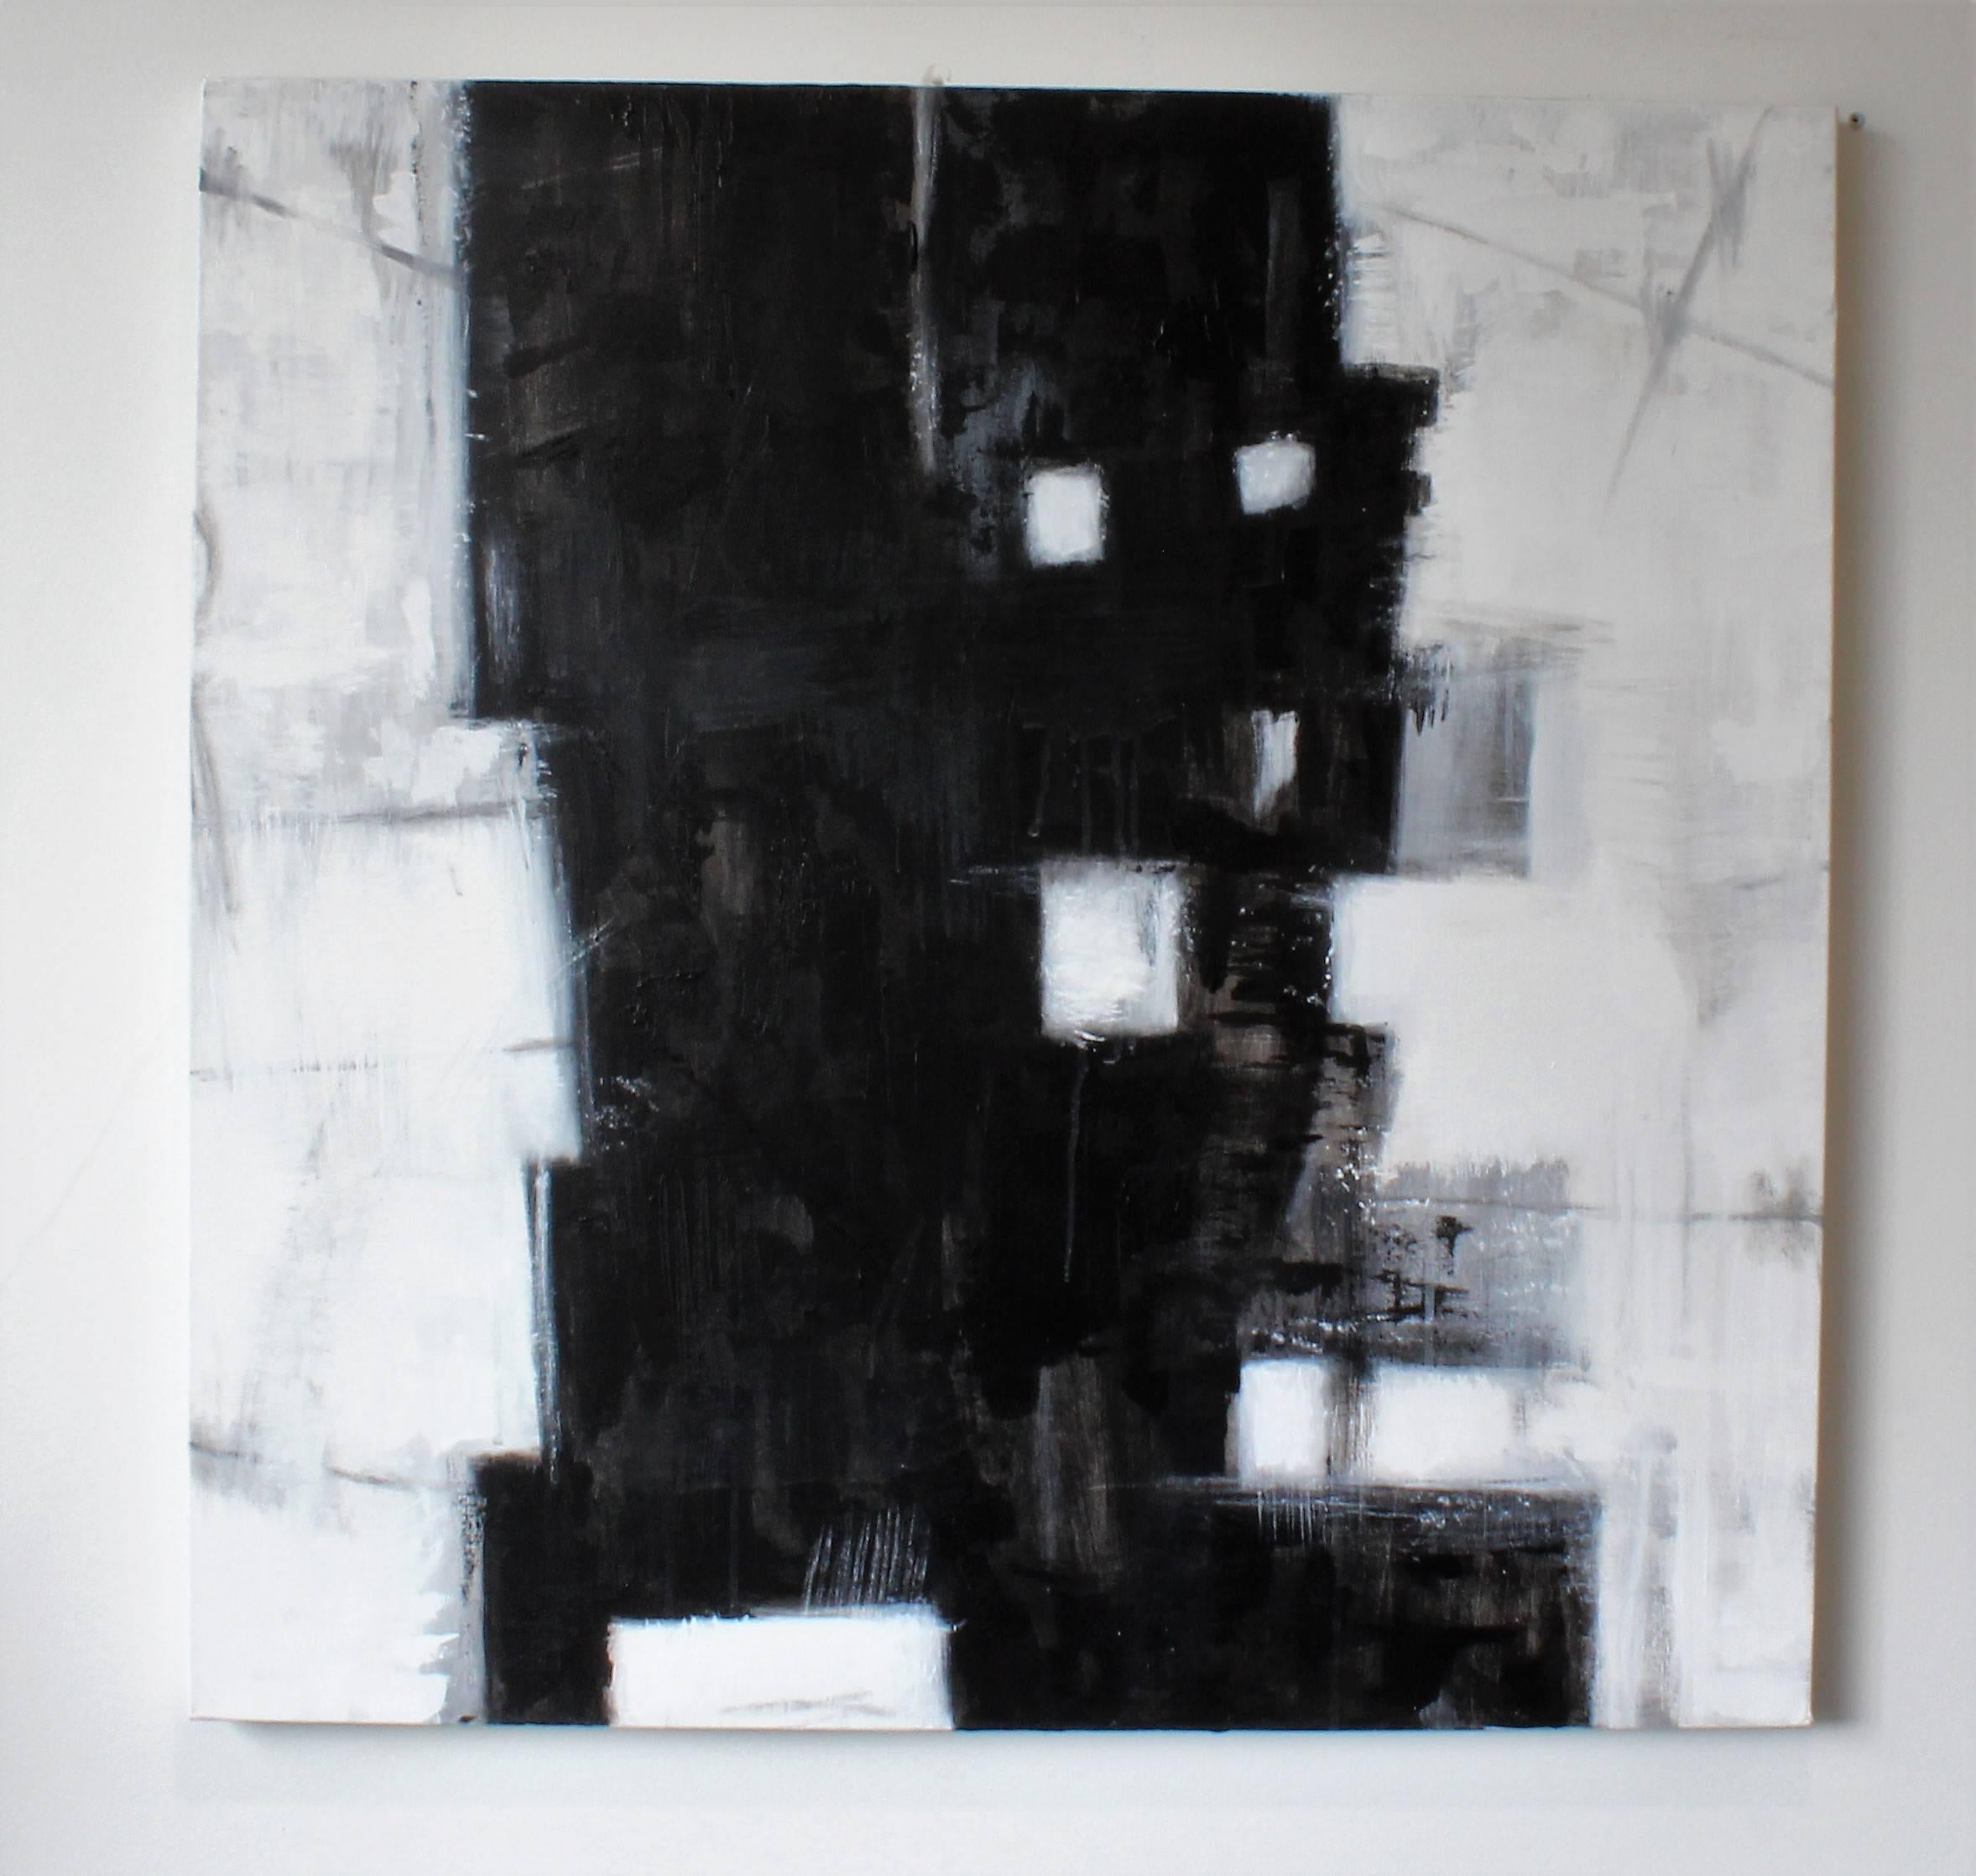 Original black and white abstract painting by Brian Potter, NYC, 2016. Incredible layers and detail. Brian's abstract and cubist style is influenced by Paul Klee, Willem de Kooning, Gerhard Richter, Robert Rauschenberg and Franz Kline.